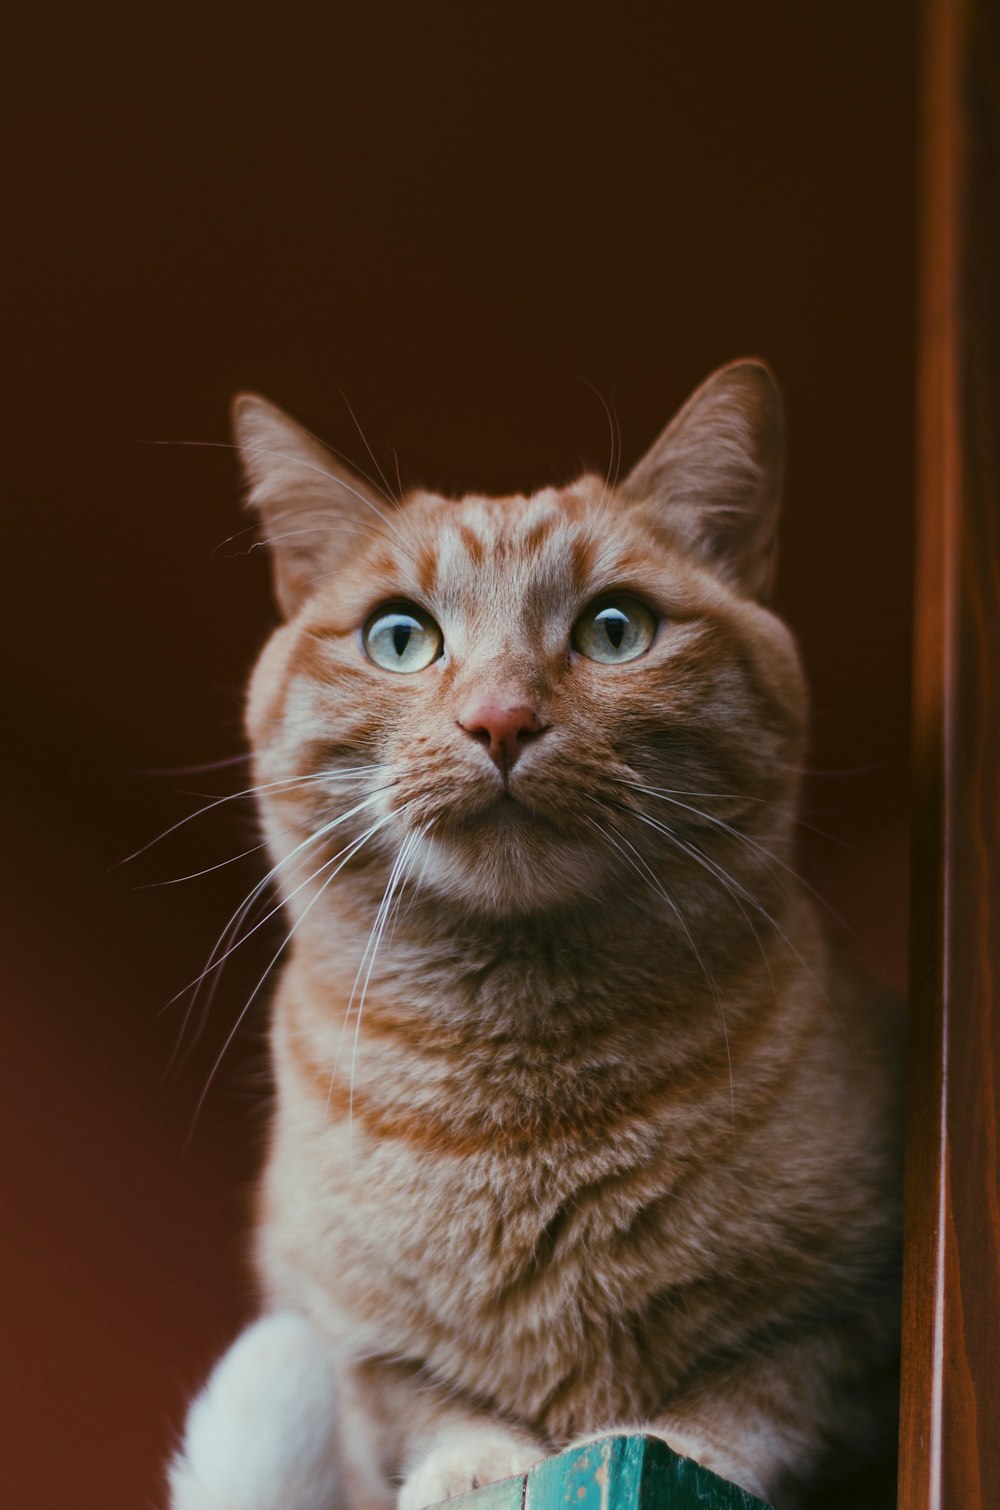 750+ Cute Cat Pictures  Download Free Images on Unsplash